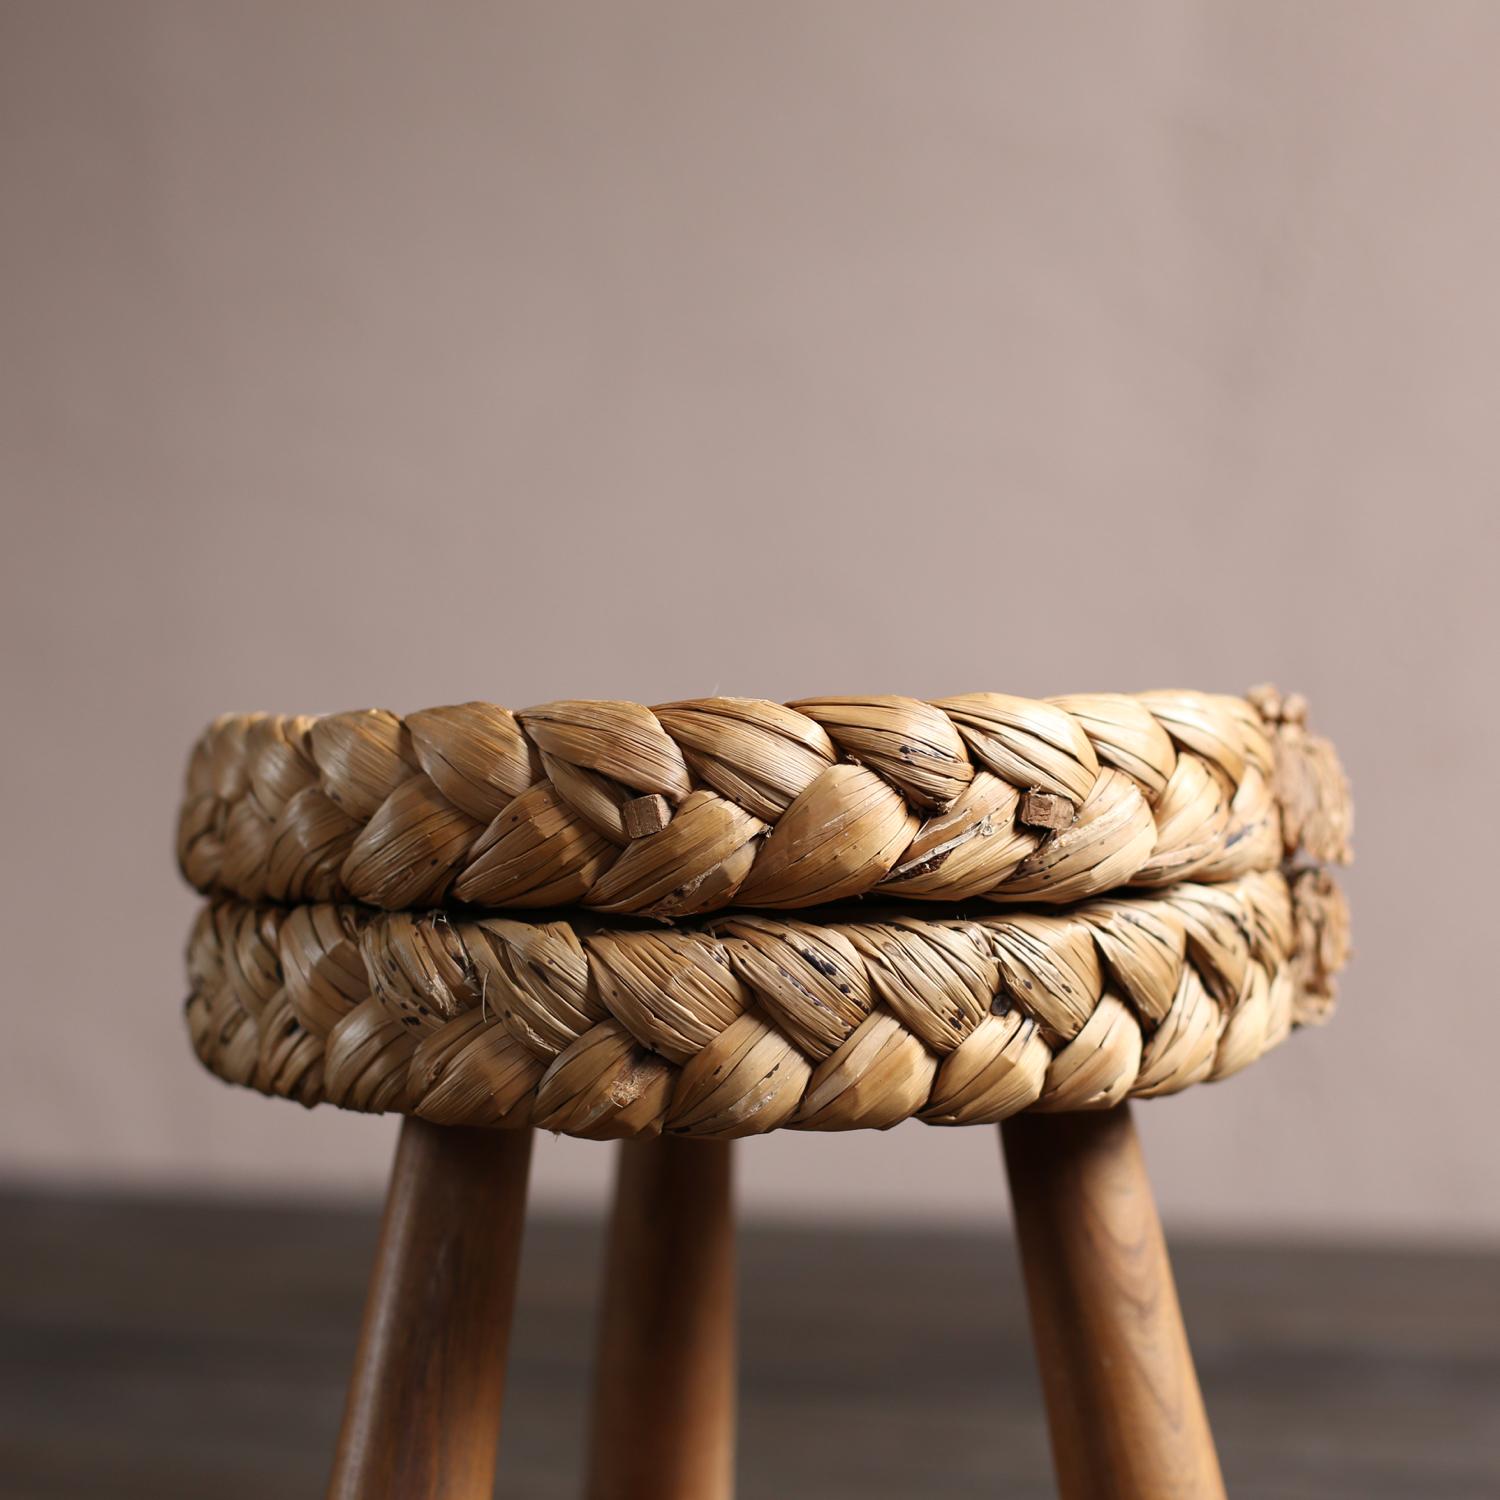 French Braided Stool by Adrien Audoux & Frida Minet